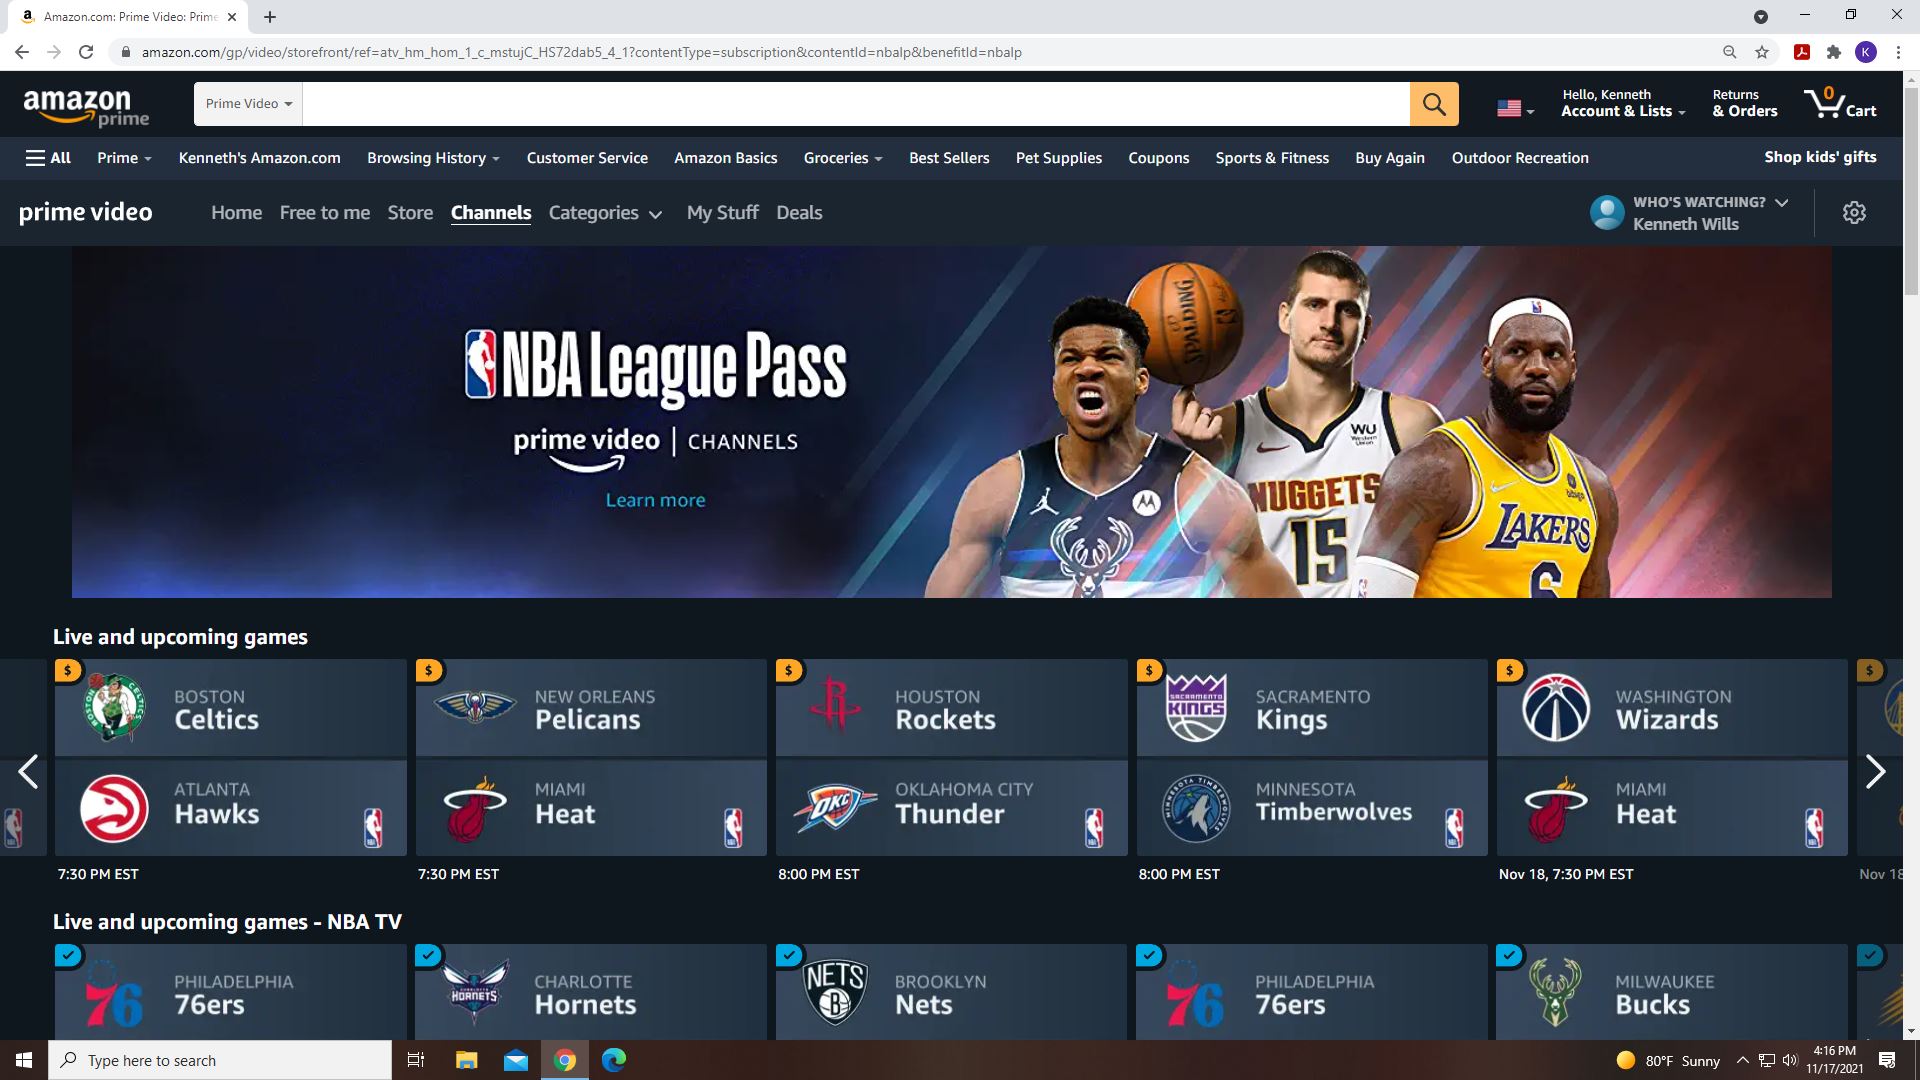 Watching recorded games with NBA League Pass subscription.